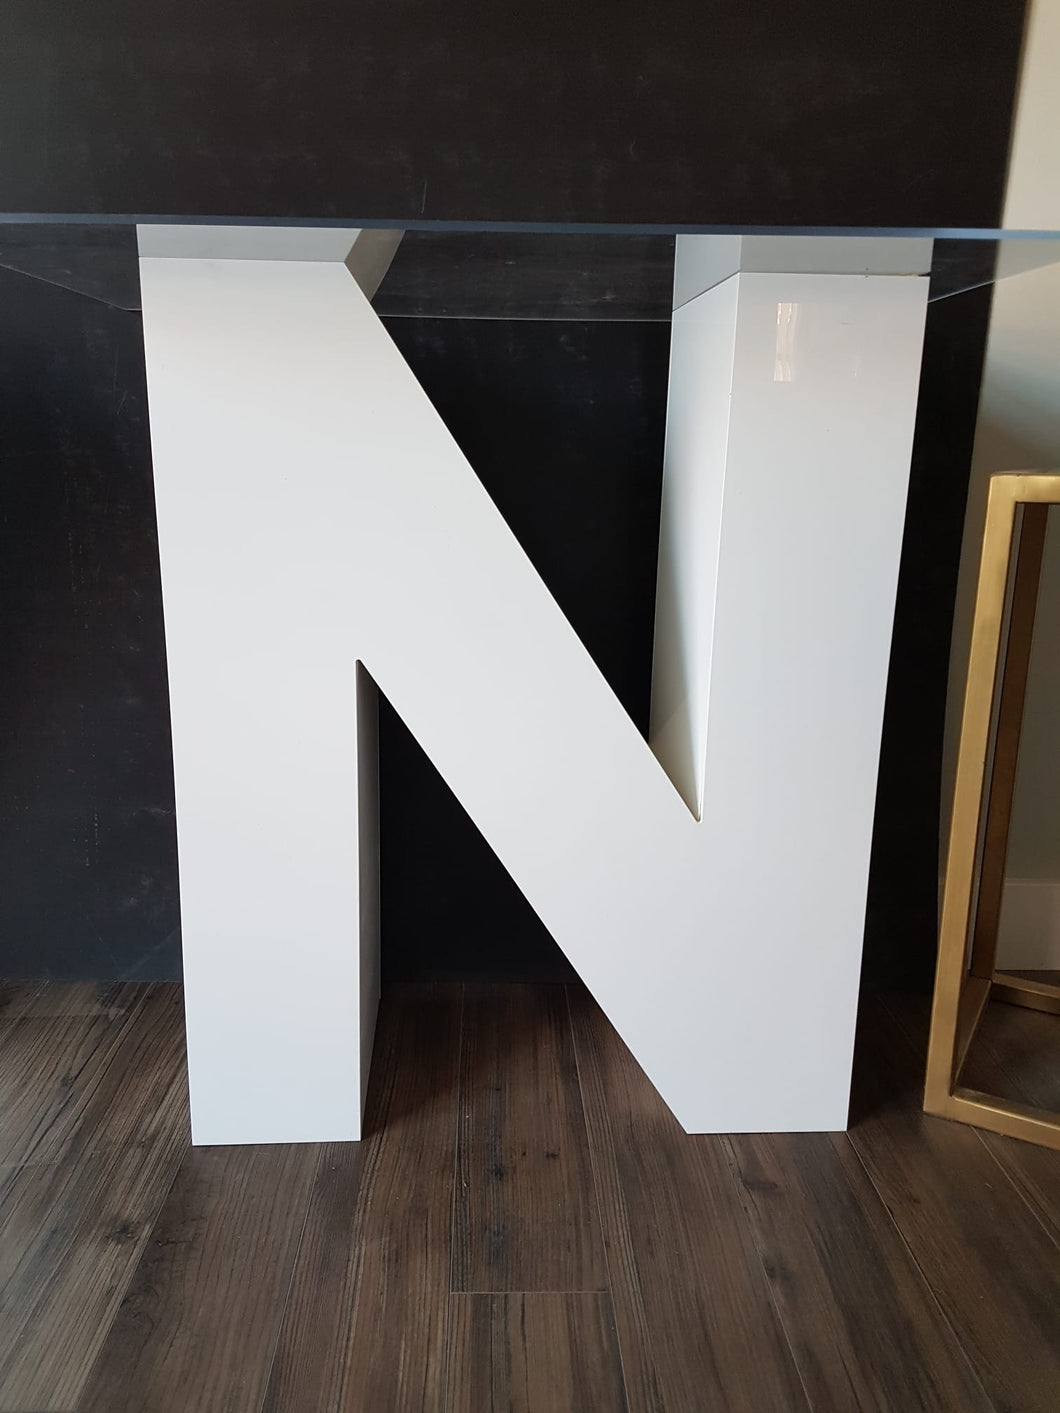 Table Marquee Letter 